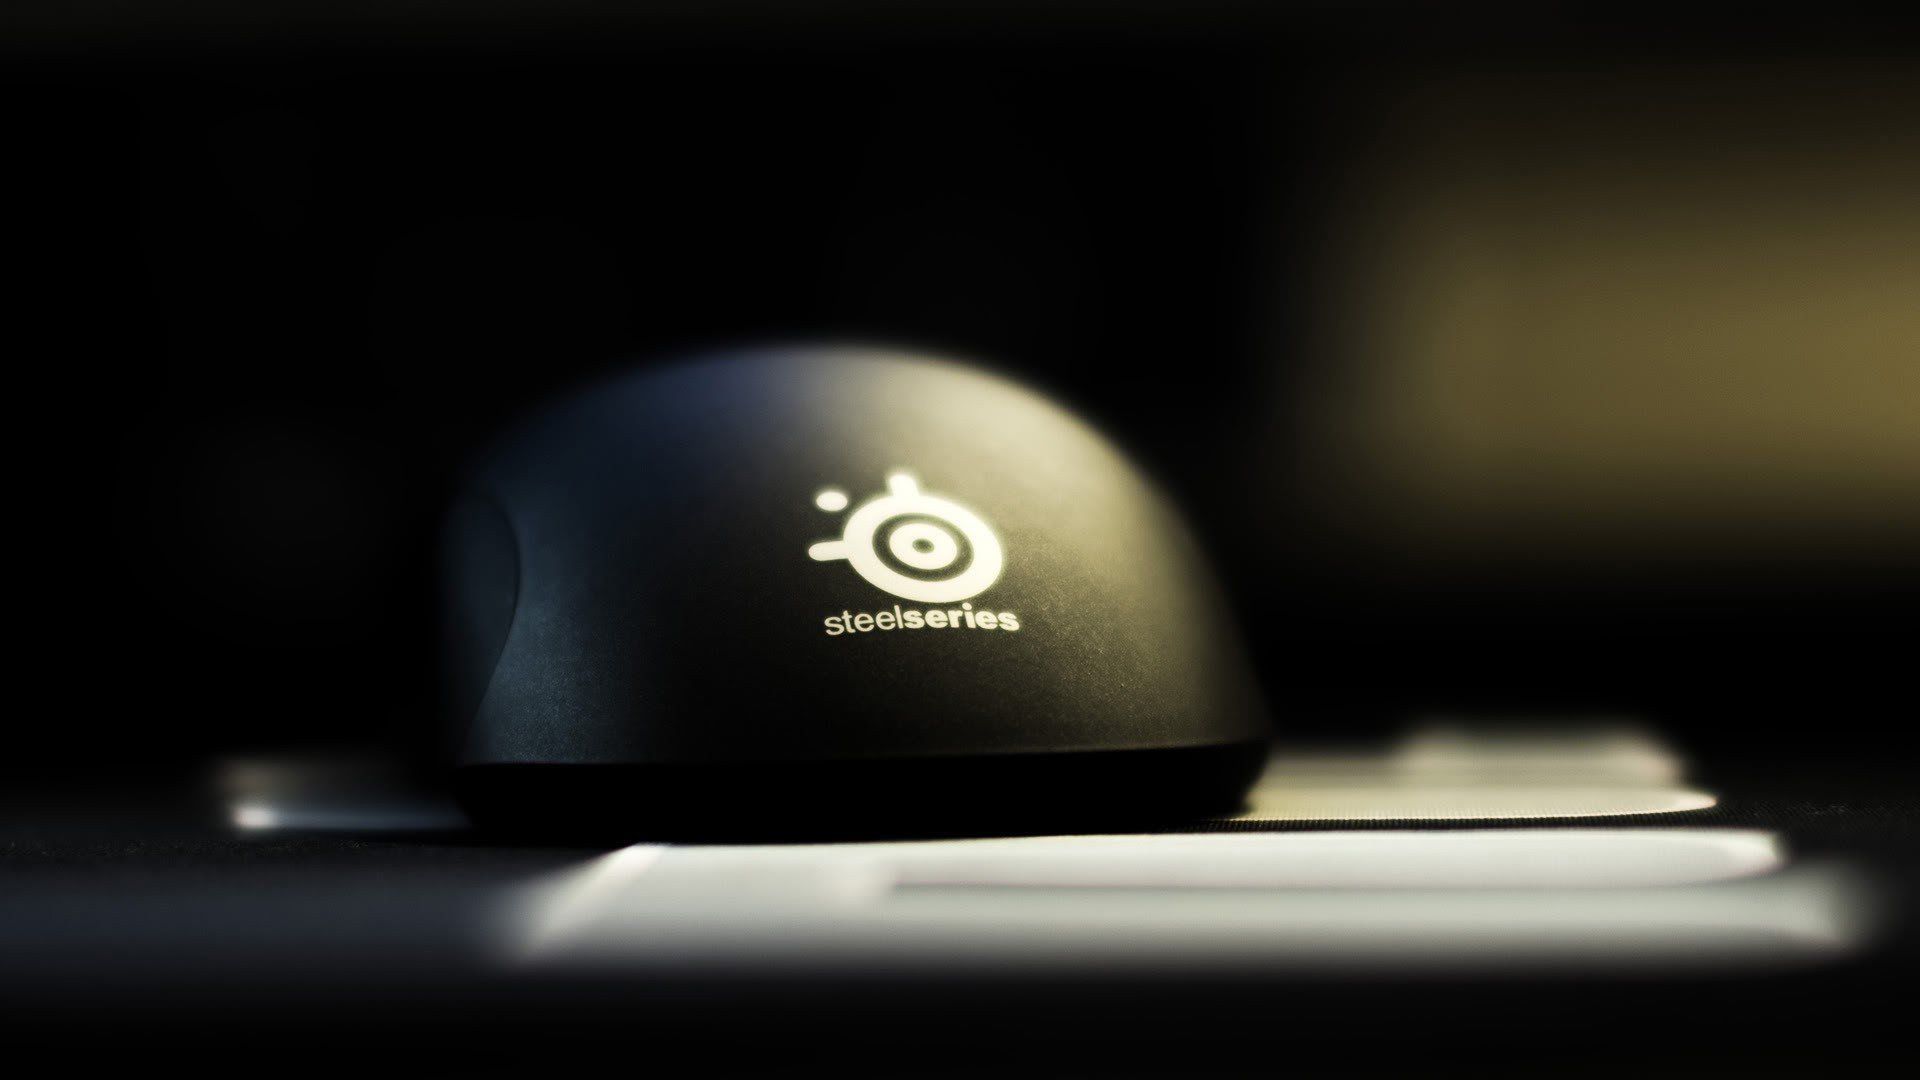 STEELSERIES Gaming computer mouse ds wallpaper | 1920x1080 ...